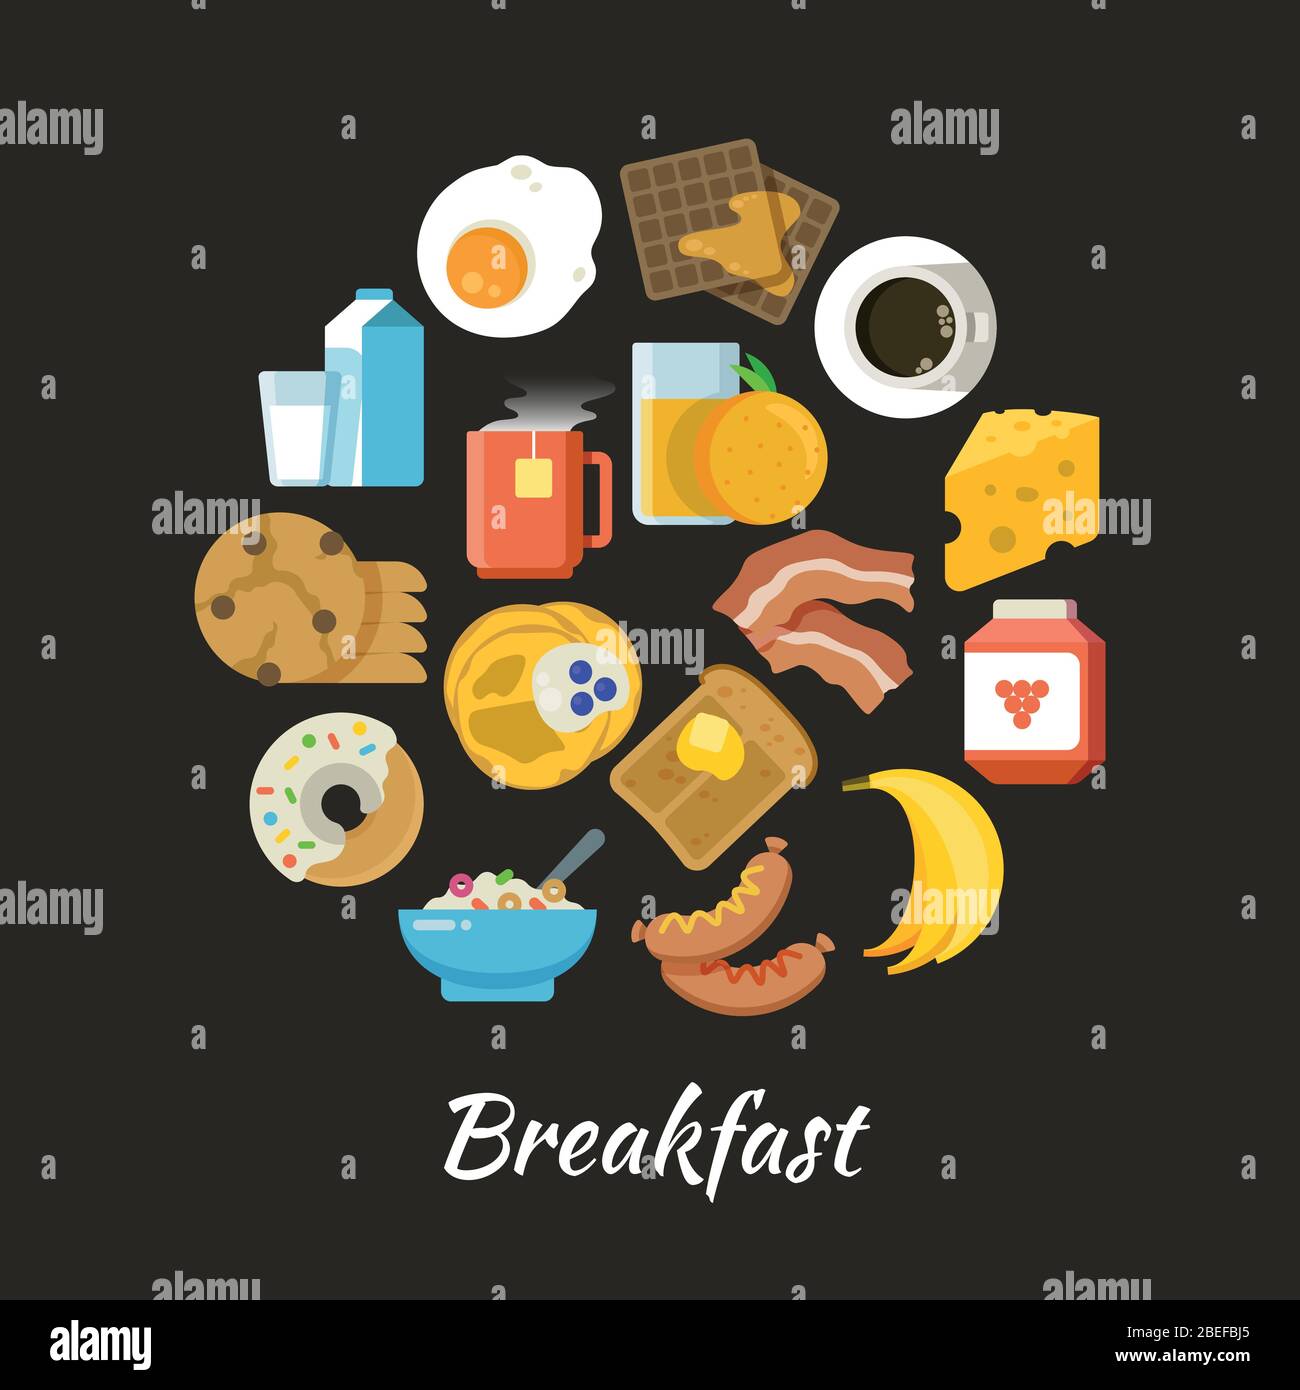 Breakfast vector concept. Fresh and healthy food flat iconce in circle design. Breakfast food fruit and egg, drink orange and coffee illustration Stock Vector